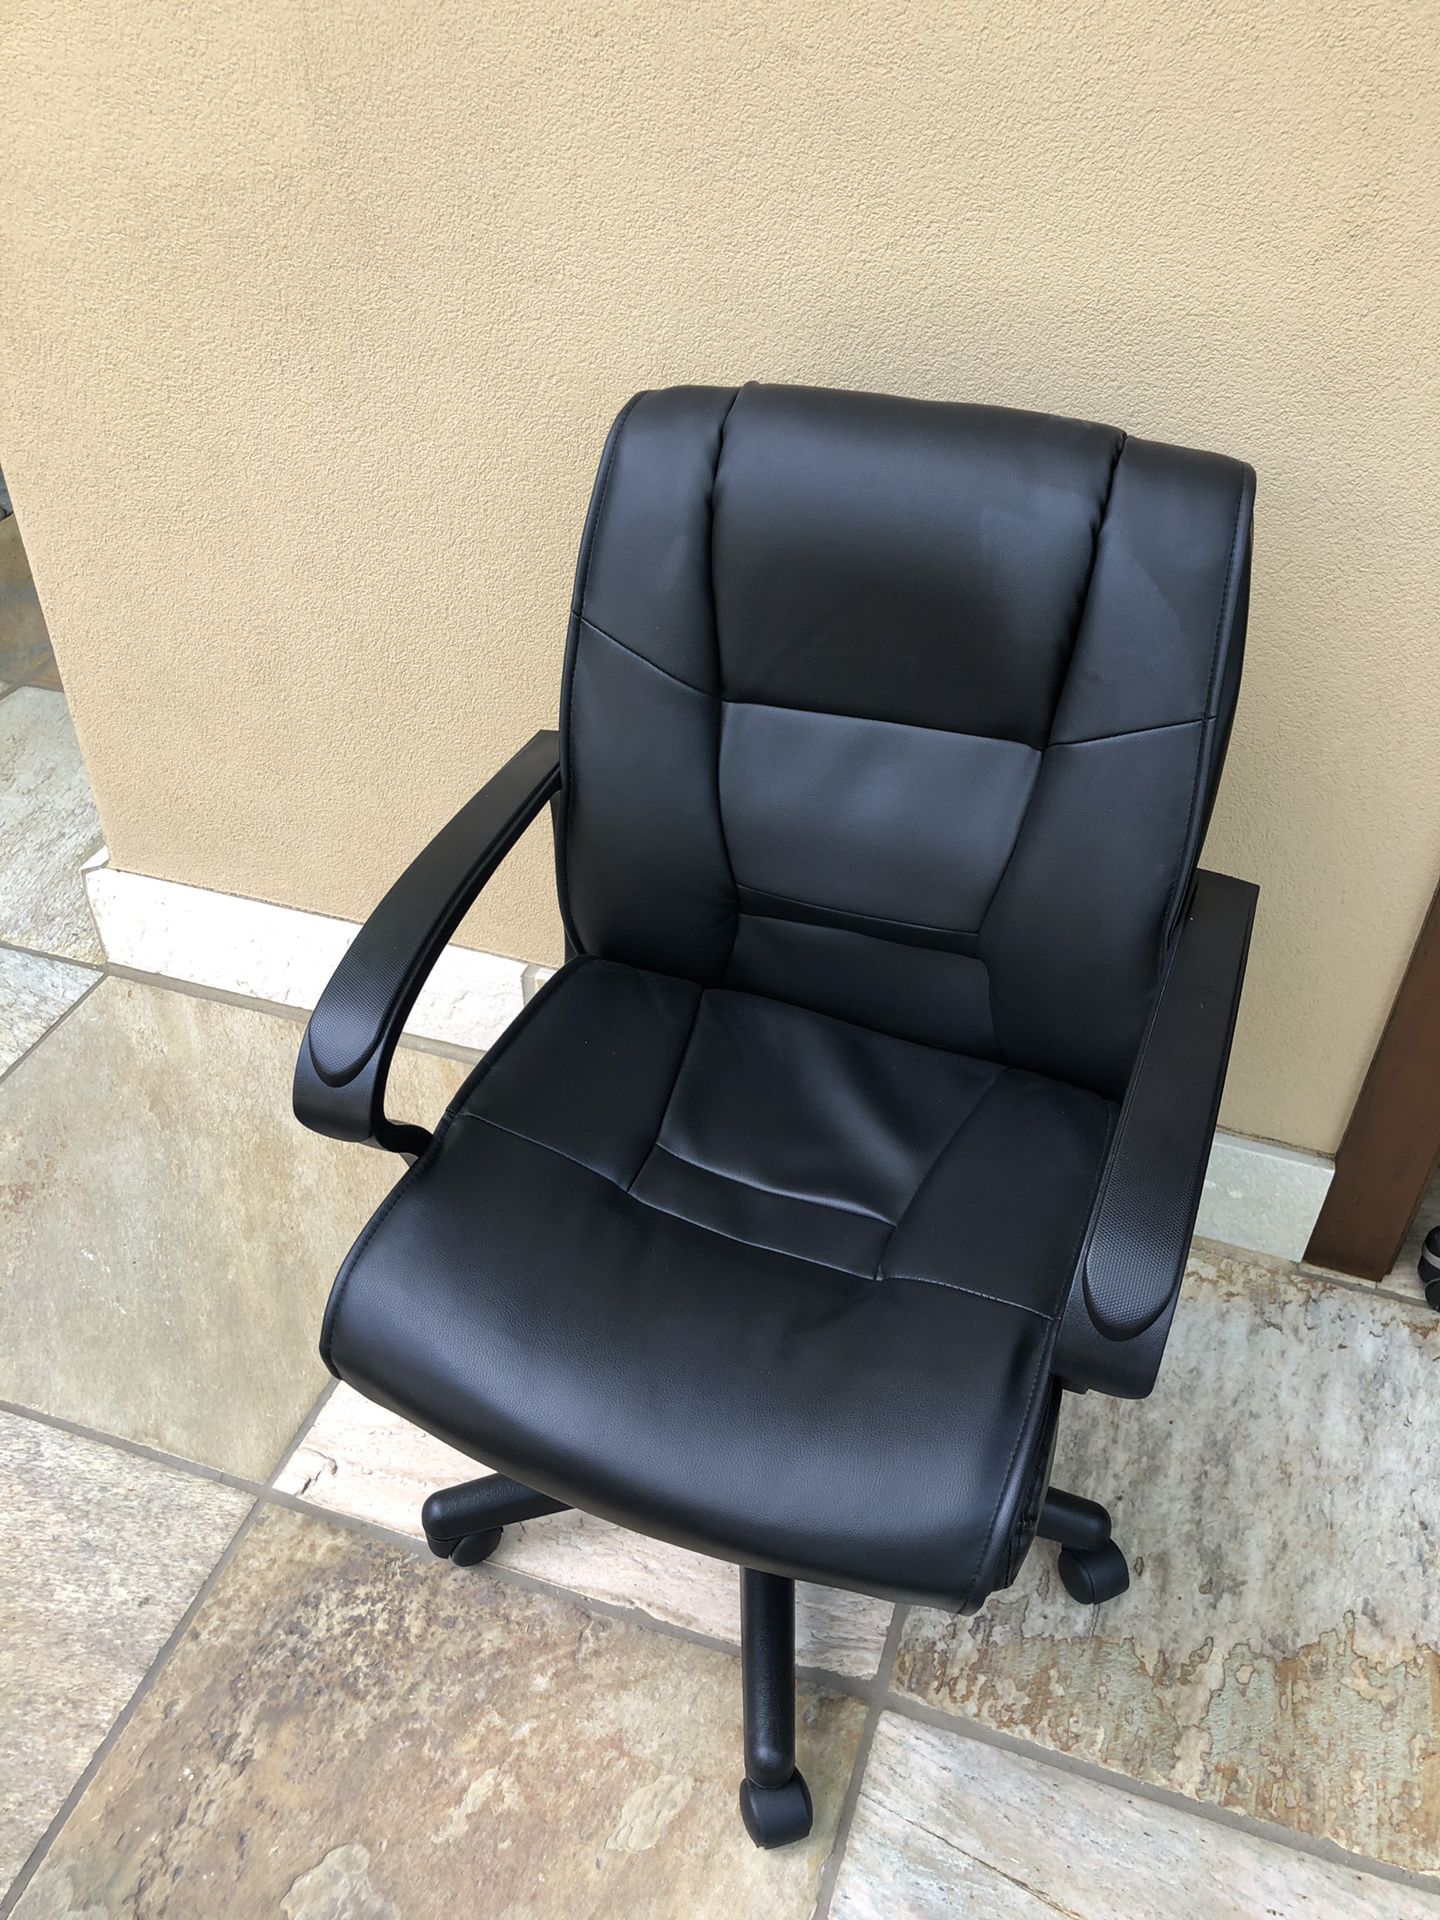 Office chair 20$